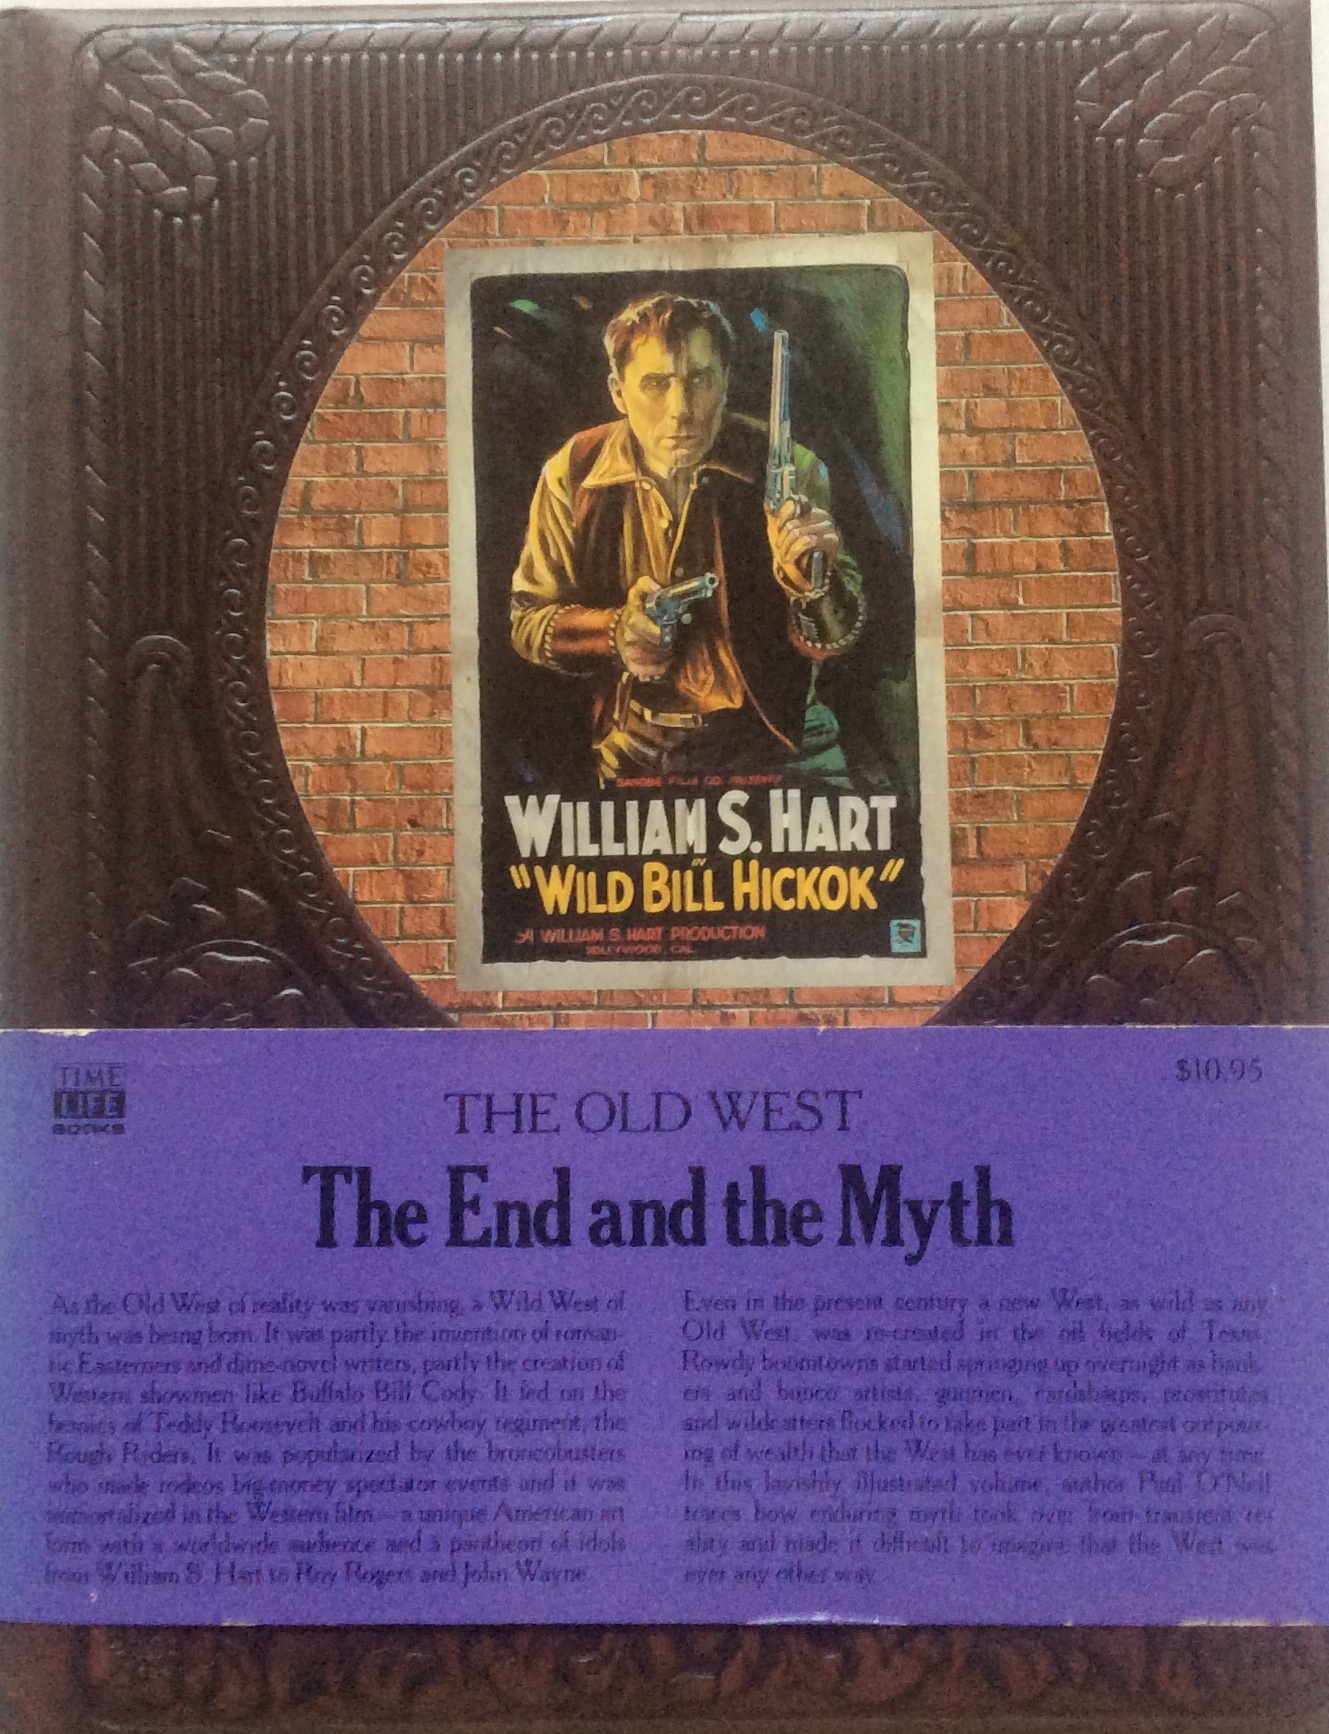 The old west The end and Myth Time life books 